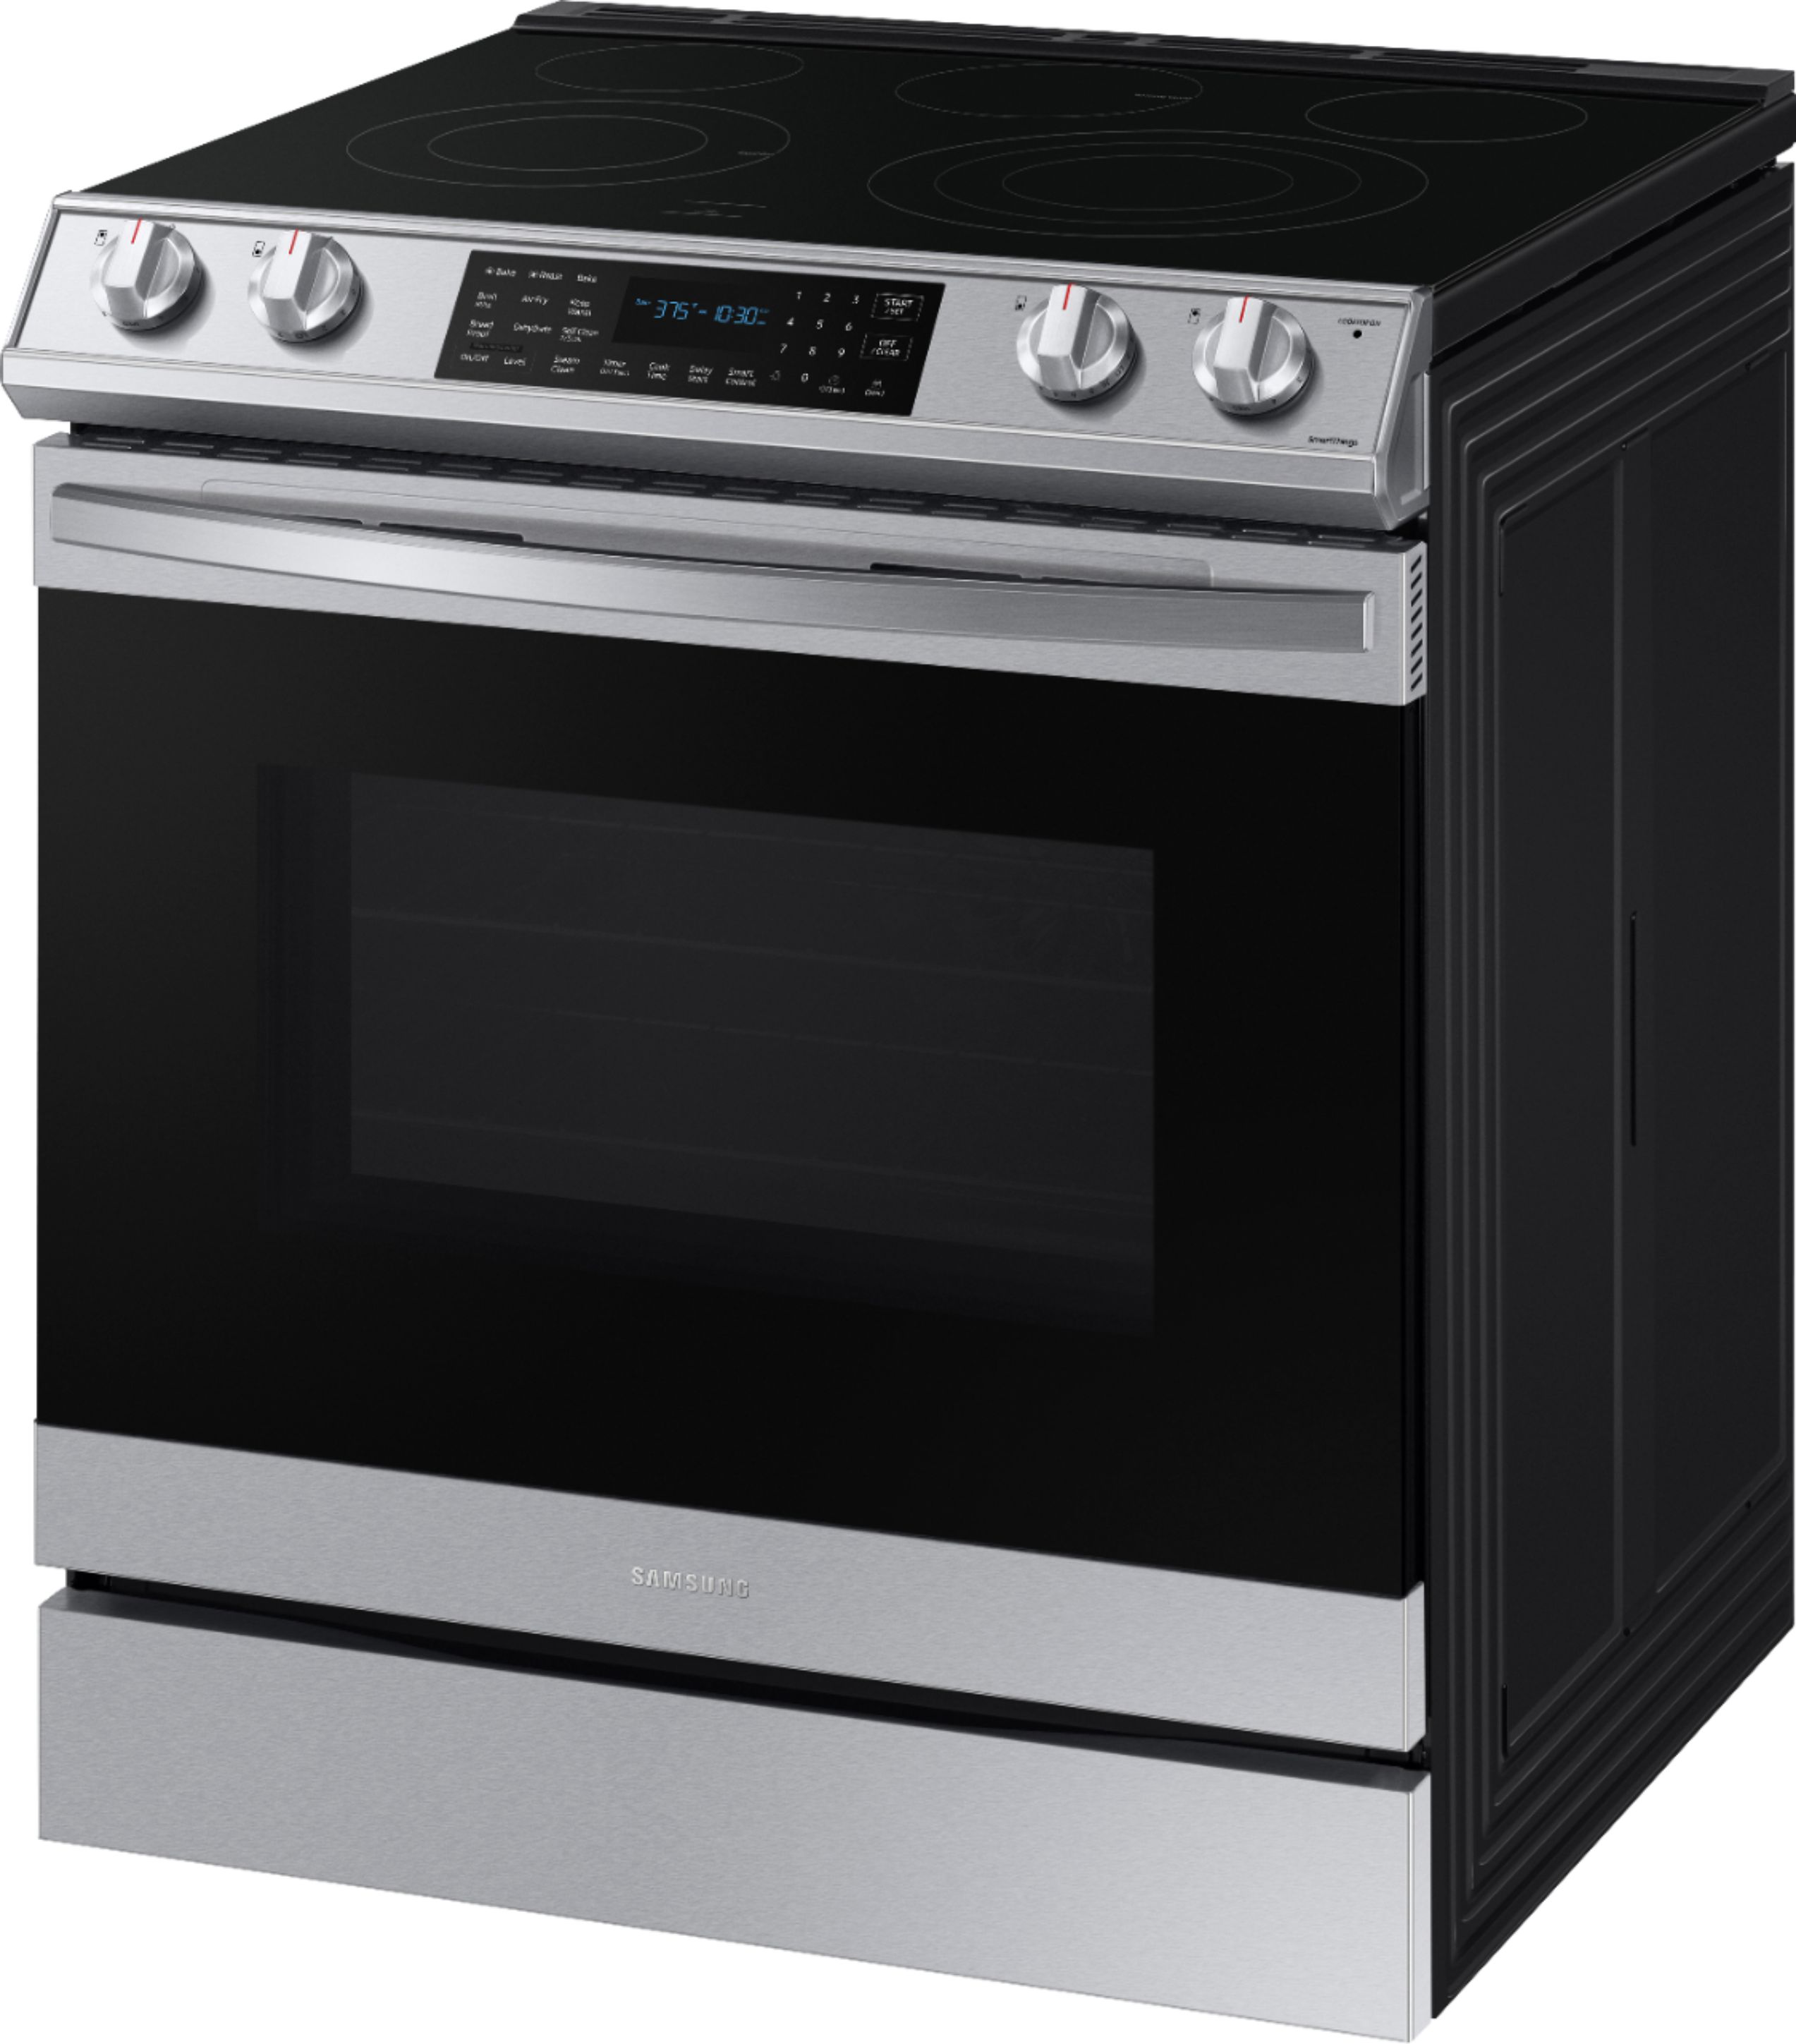 How To Use a Stove and Oven With Electronic Control - Full